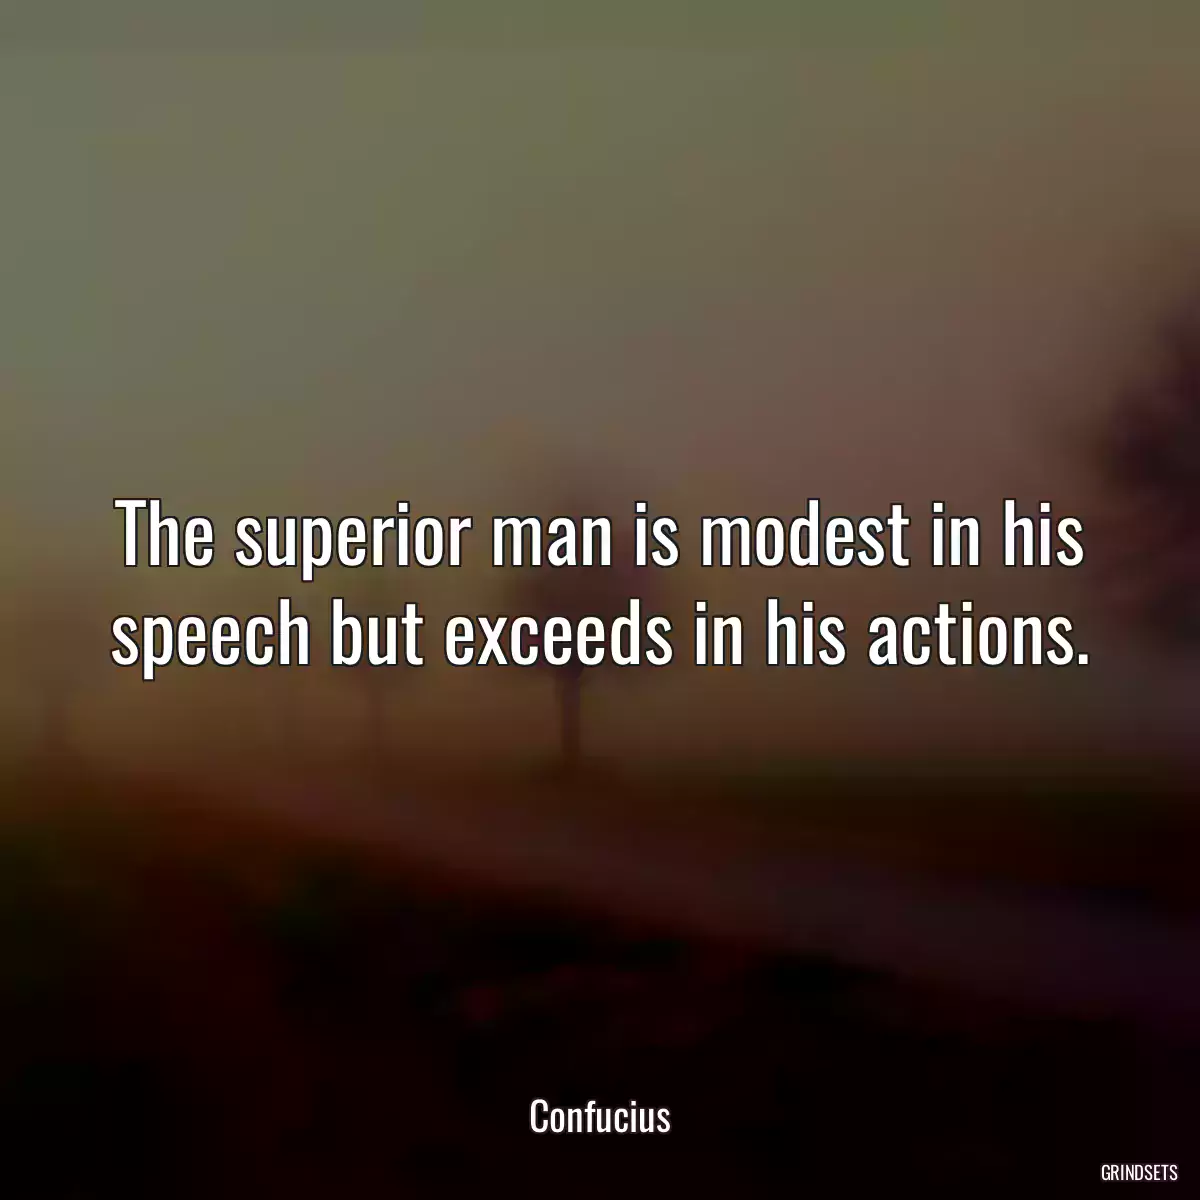 The superior man is modest in his speech but exceeds in his actions.